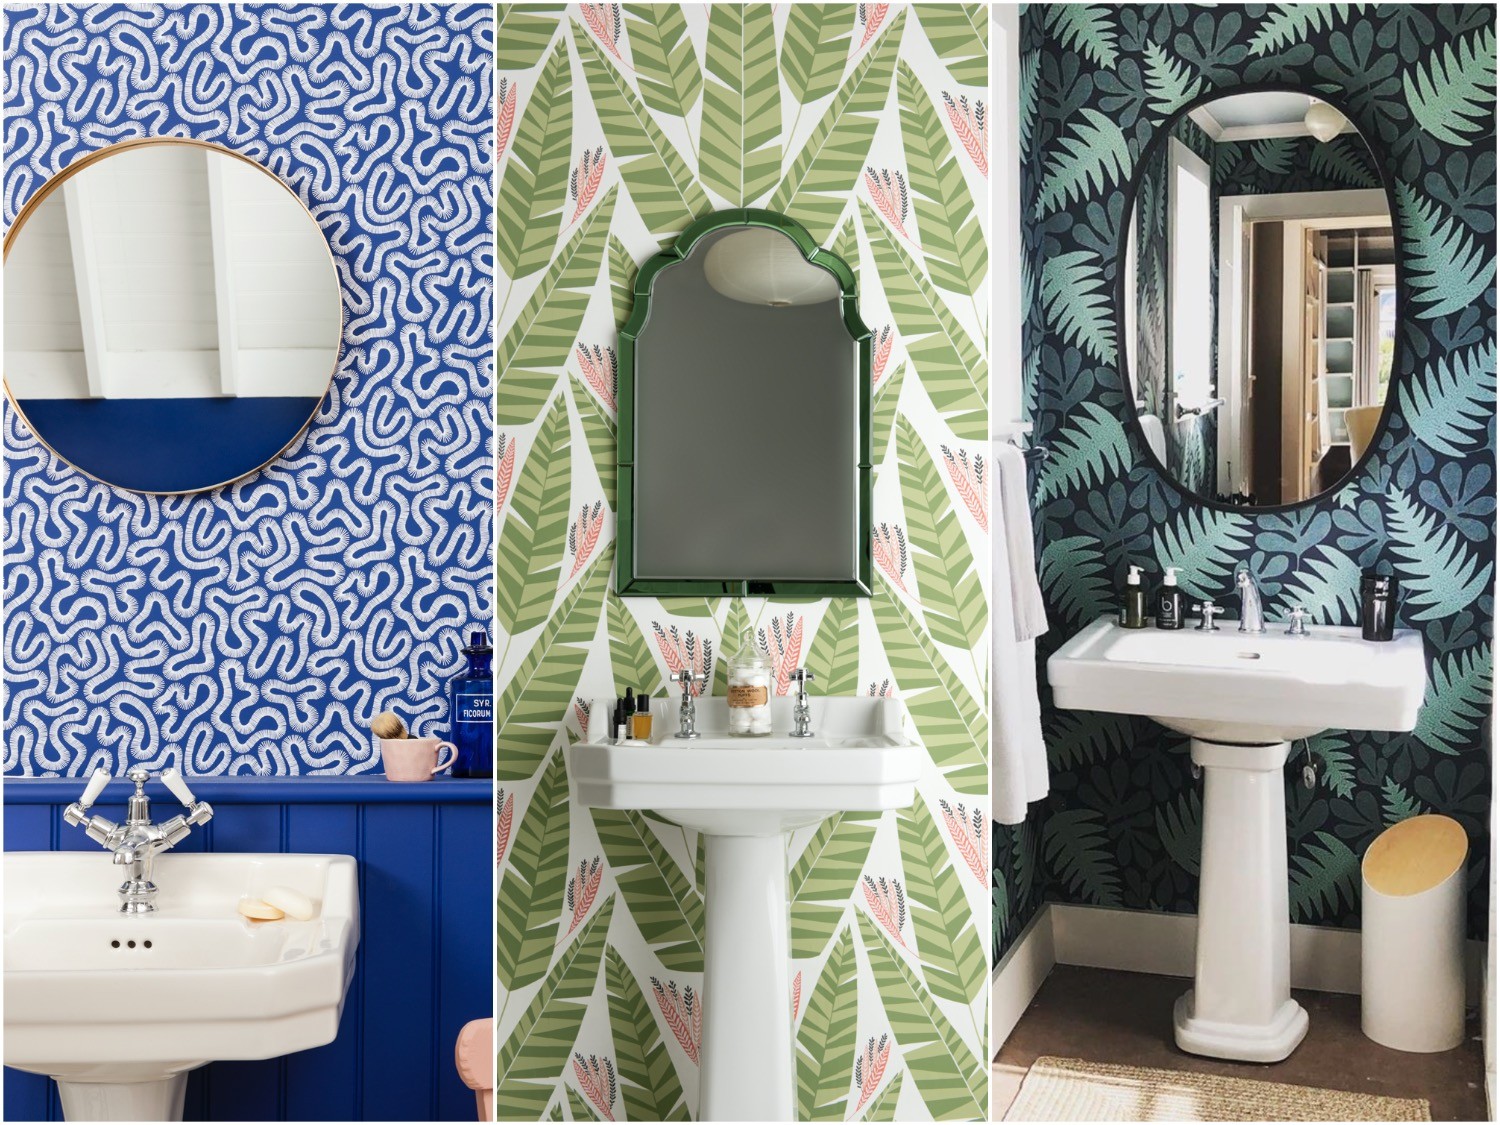 Colourful cloakroom wallpaper